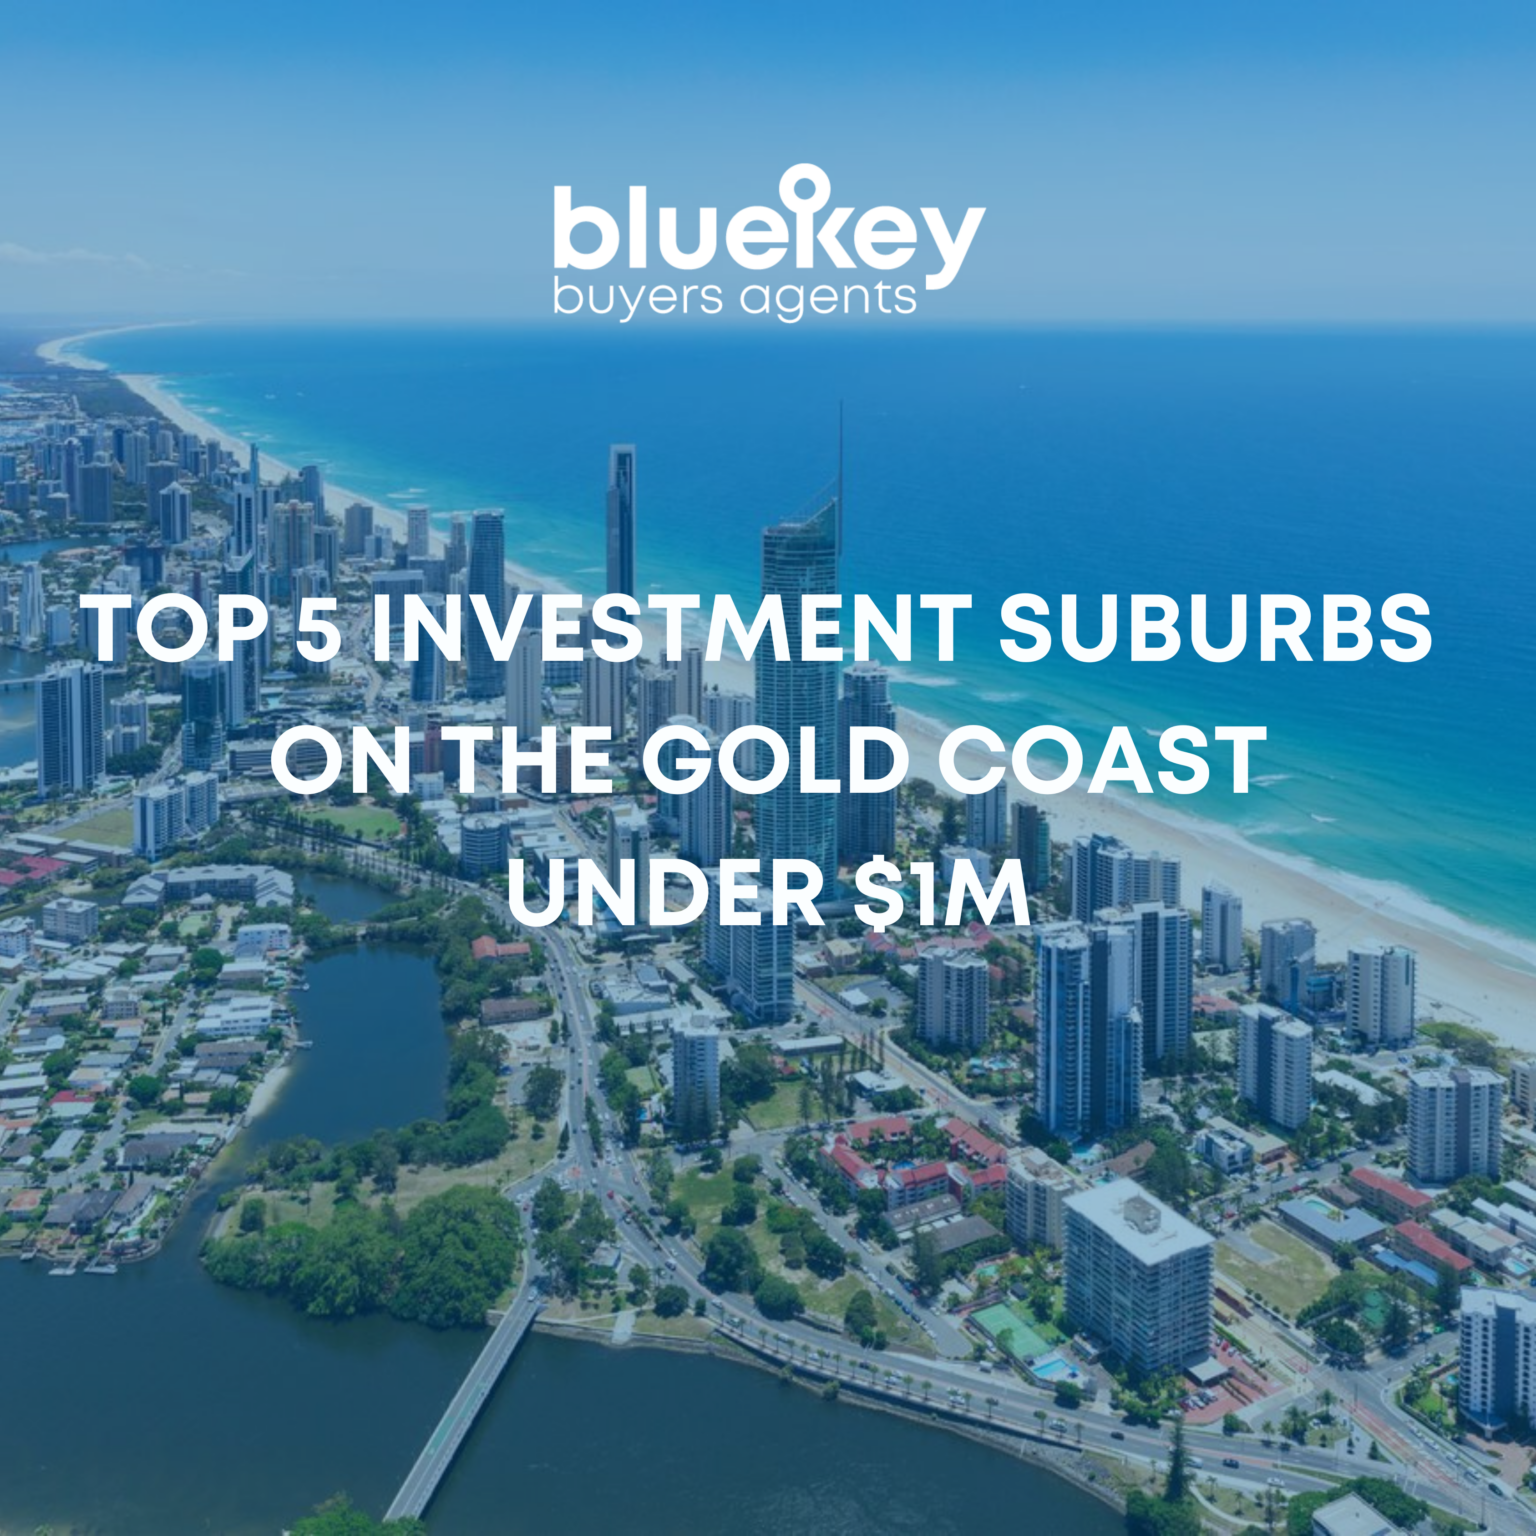 top 5 investment suburbs on the gold coast under $1m